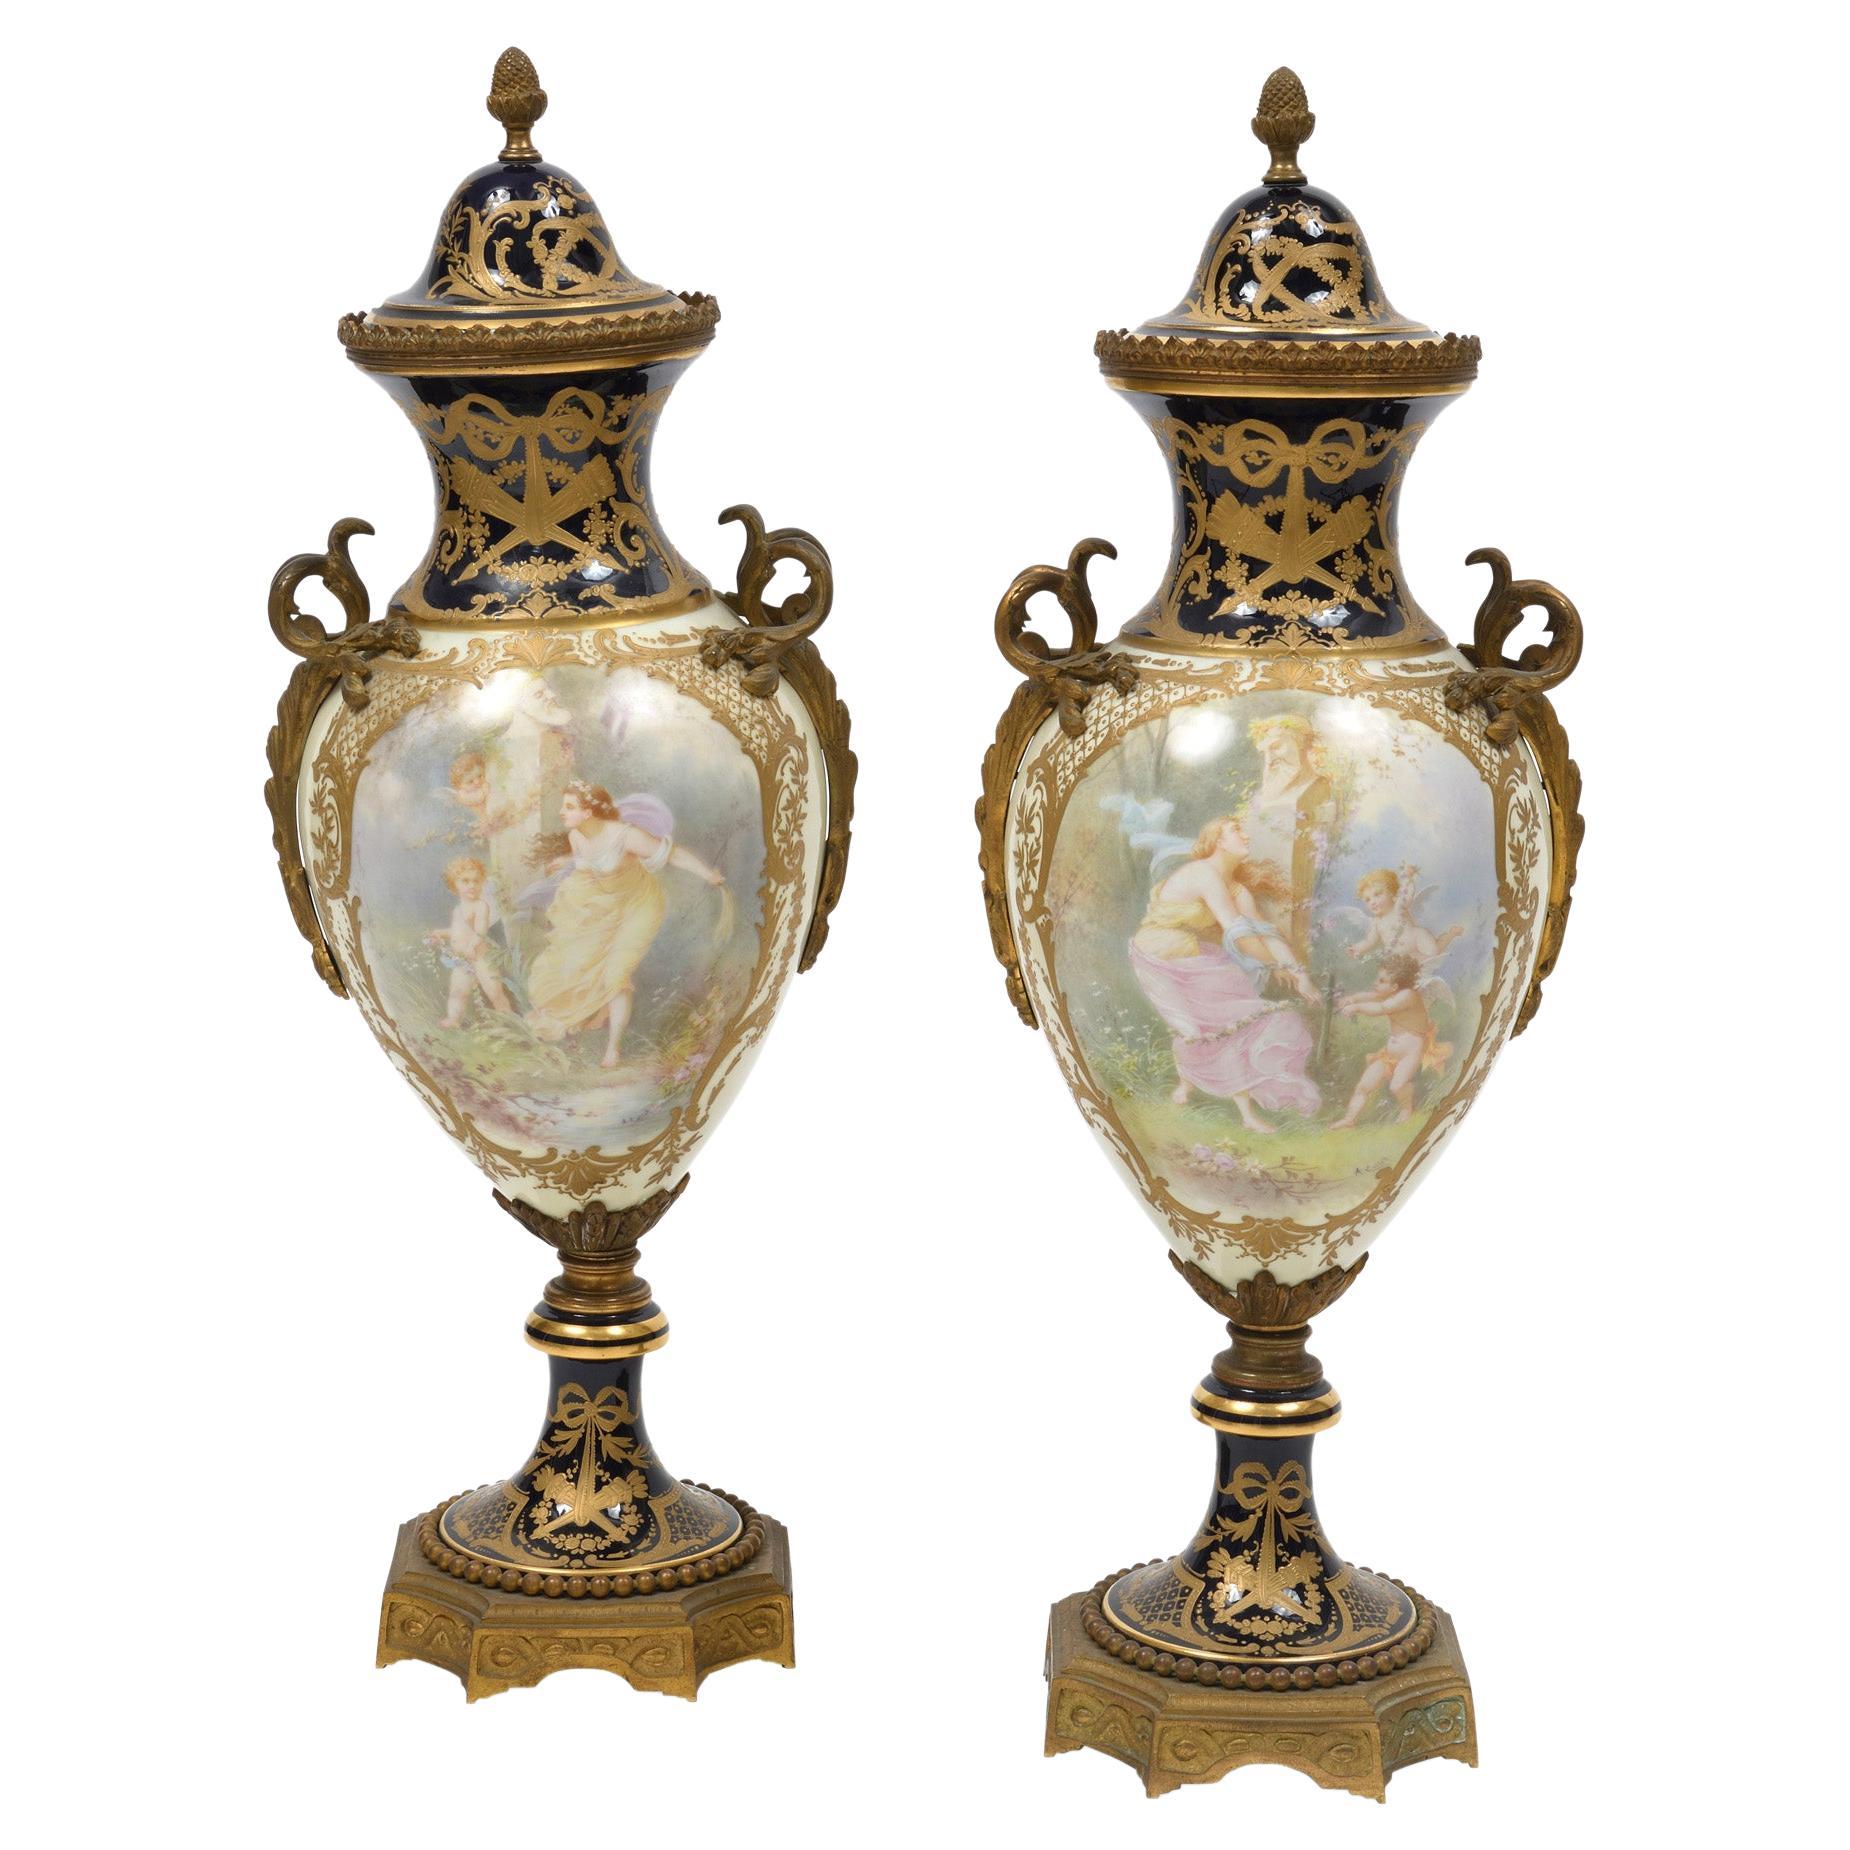 Decorative Pair of Vase in Sevres Porcelain with Ormolu Bronze